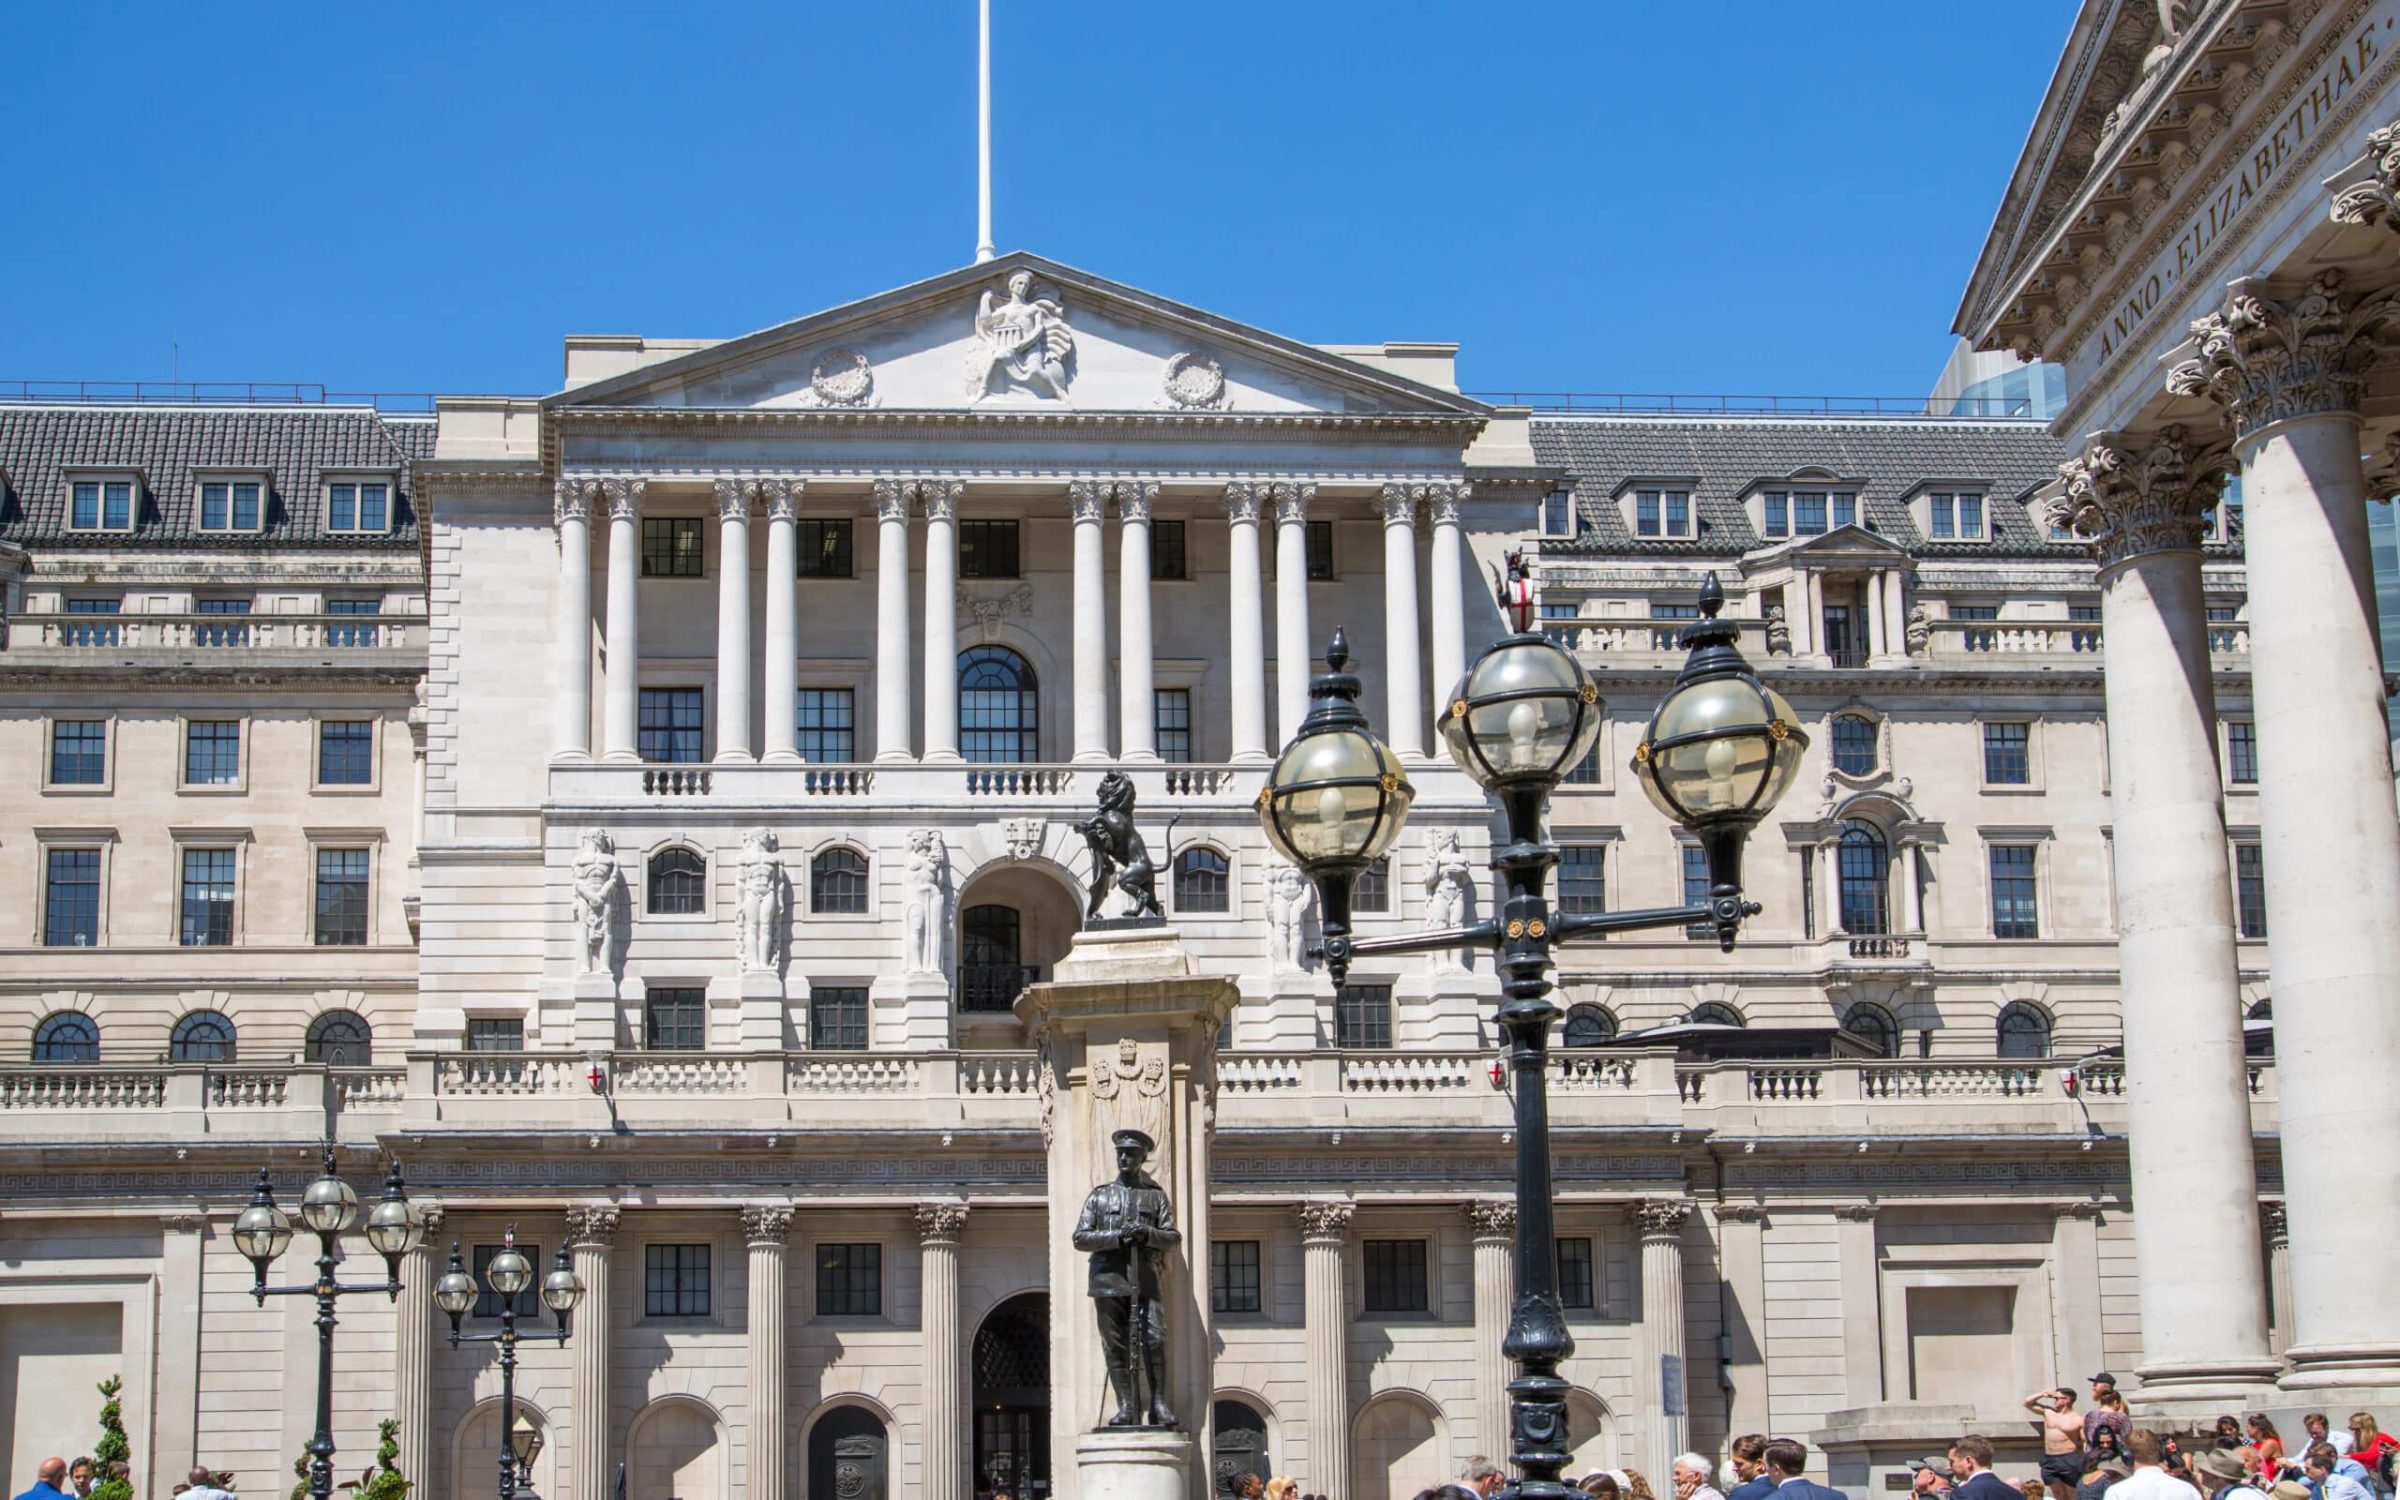 London, UK - 25 April, 2019: Bank of England in the City of London.